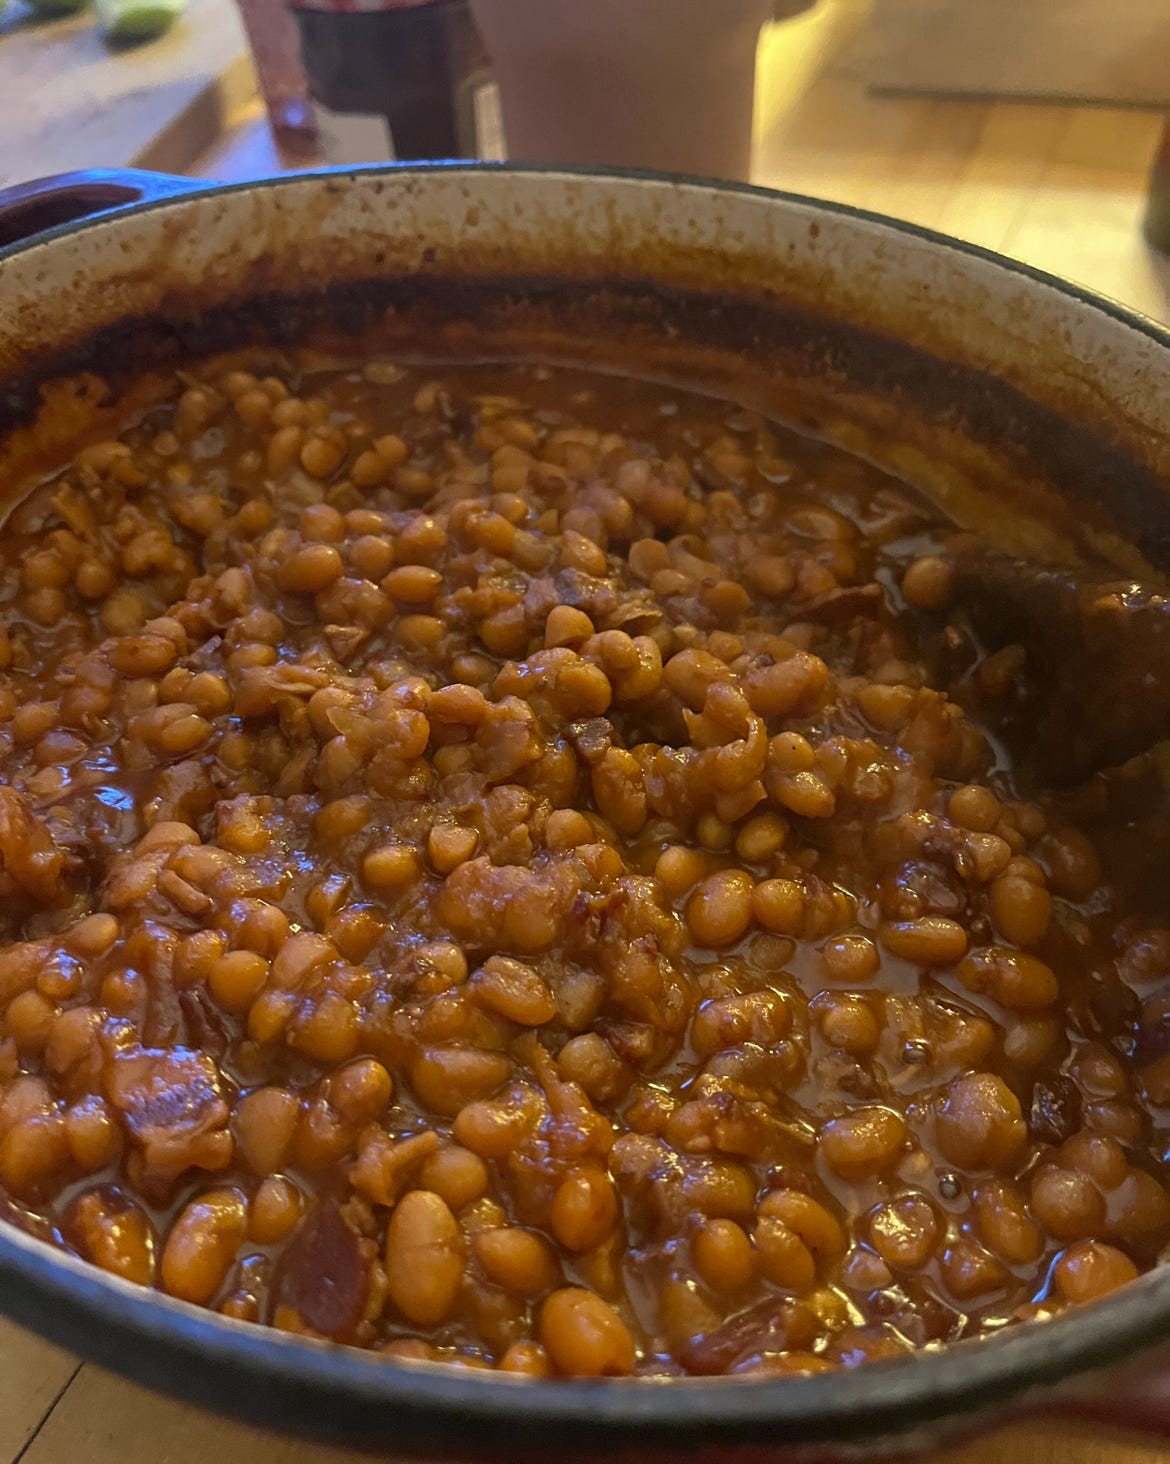 A pot of baked beans. You can see they've baked a good long time, as there's a good layer of sauce baked against the ridge of the pot